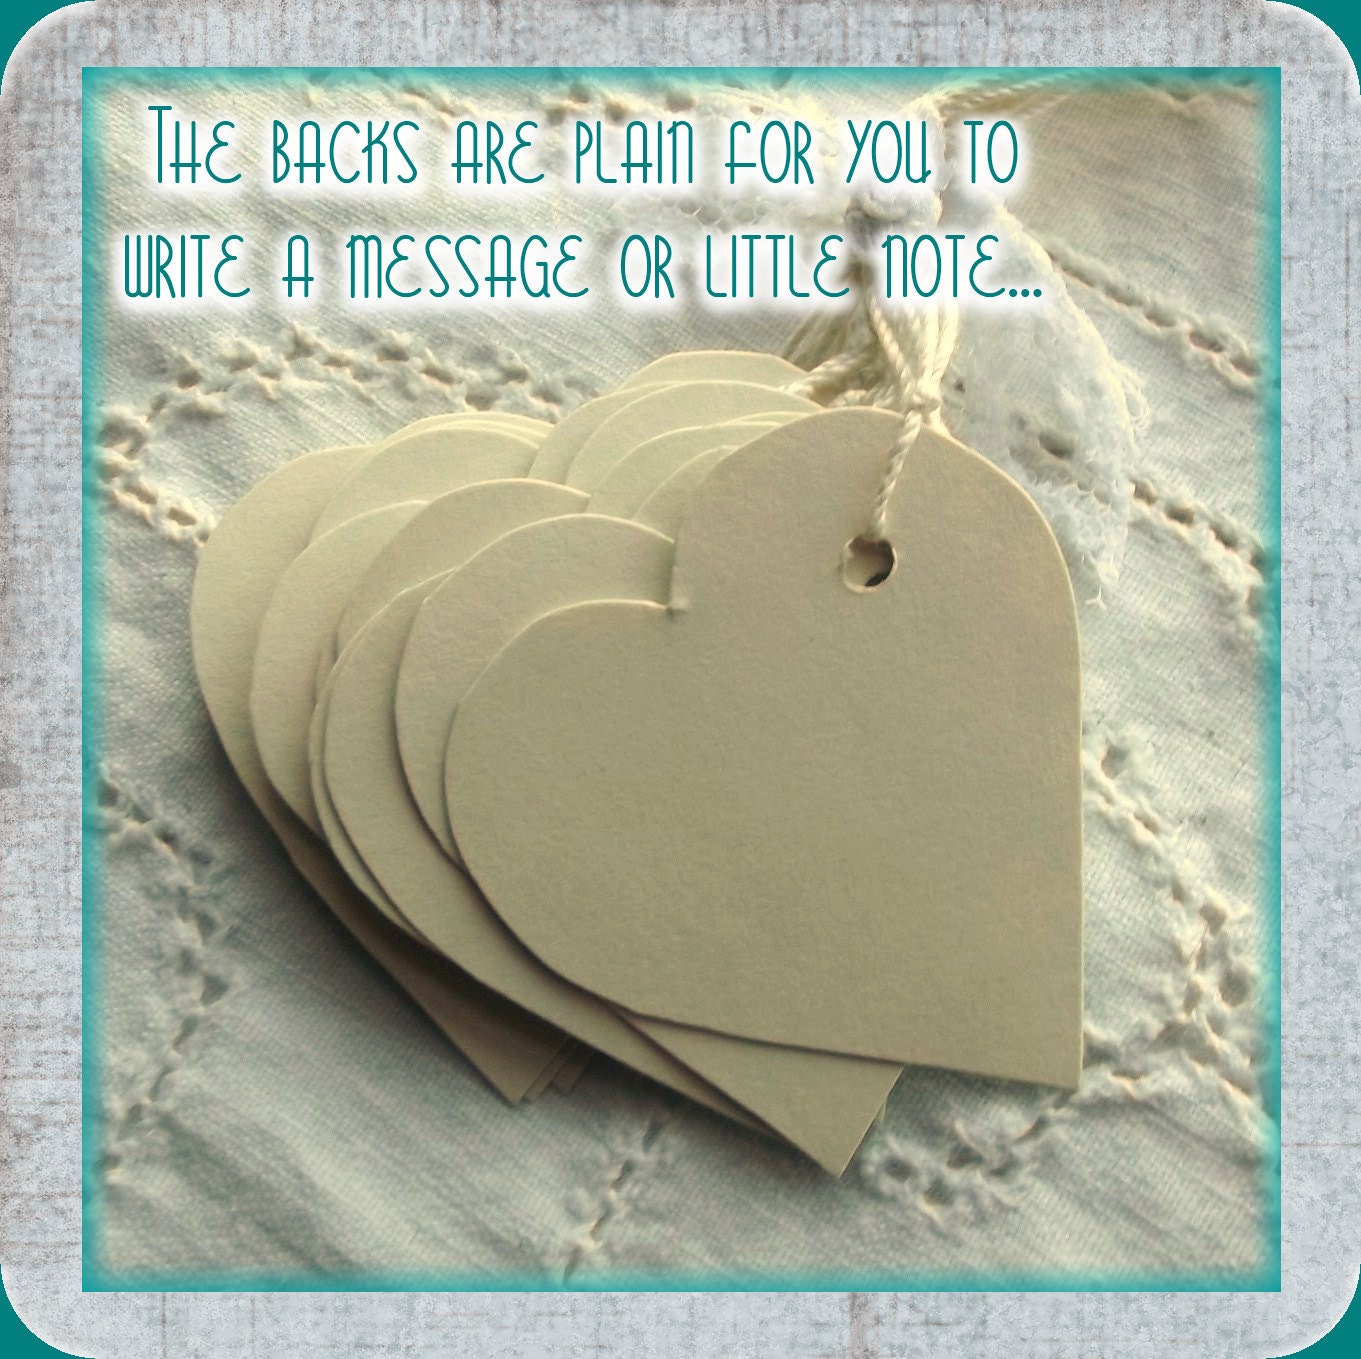 Teal Floral Heart Tags - Stamped, Shabby Chic, Cream Twine